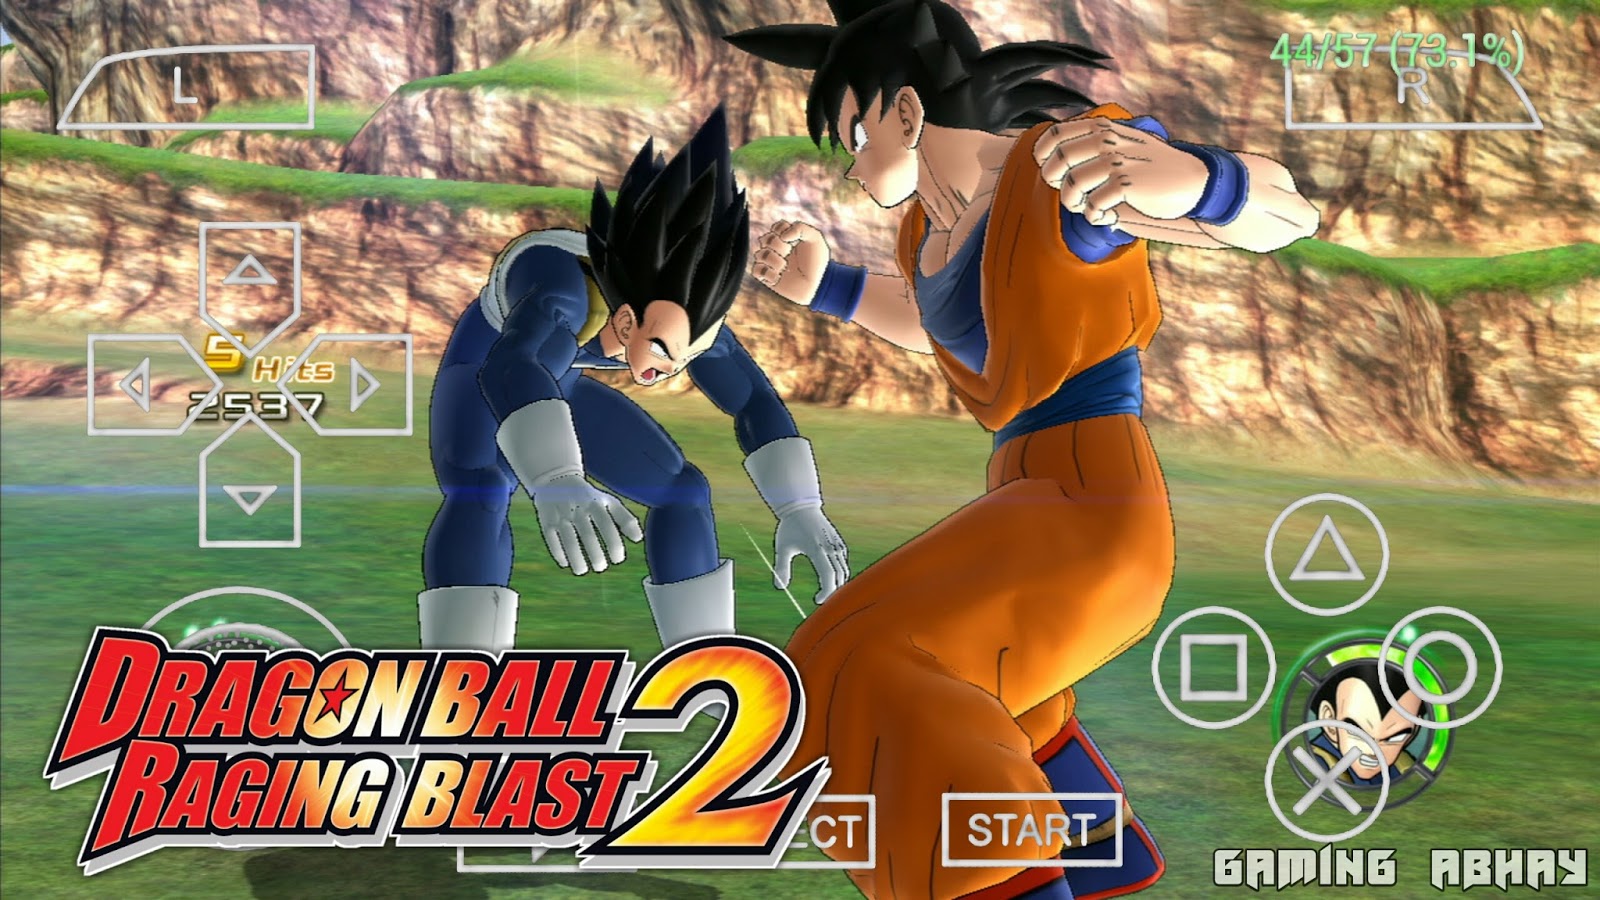 Dragon ball z raging blast 2 for ppsspp download